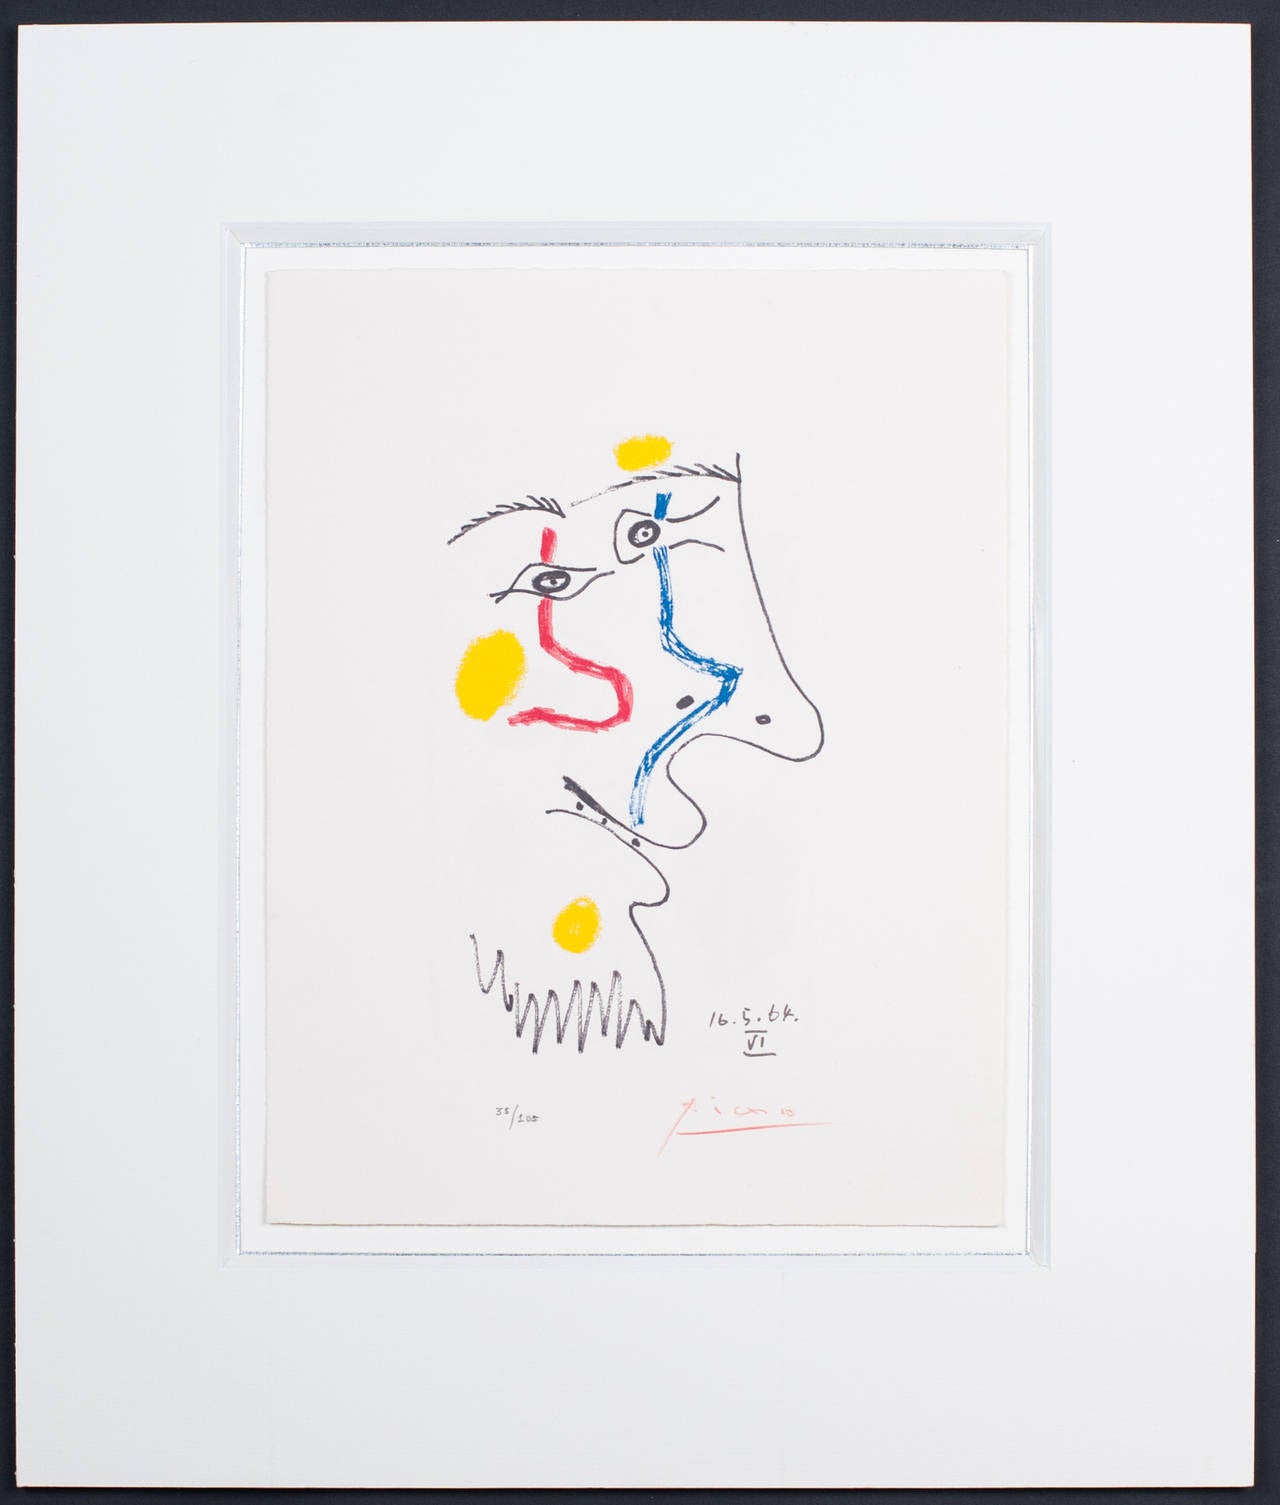 The Taste of Happiness 16.5.64 VI - Print by Pablo Picasso